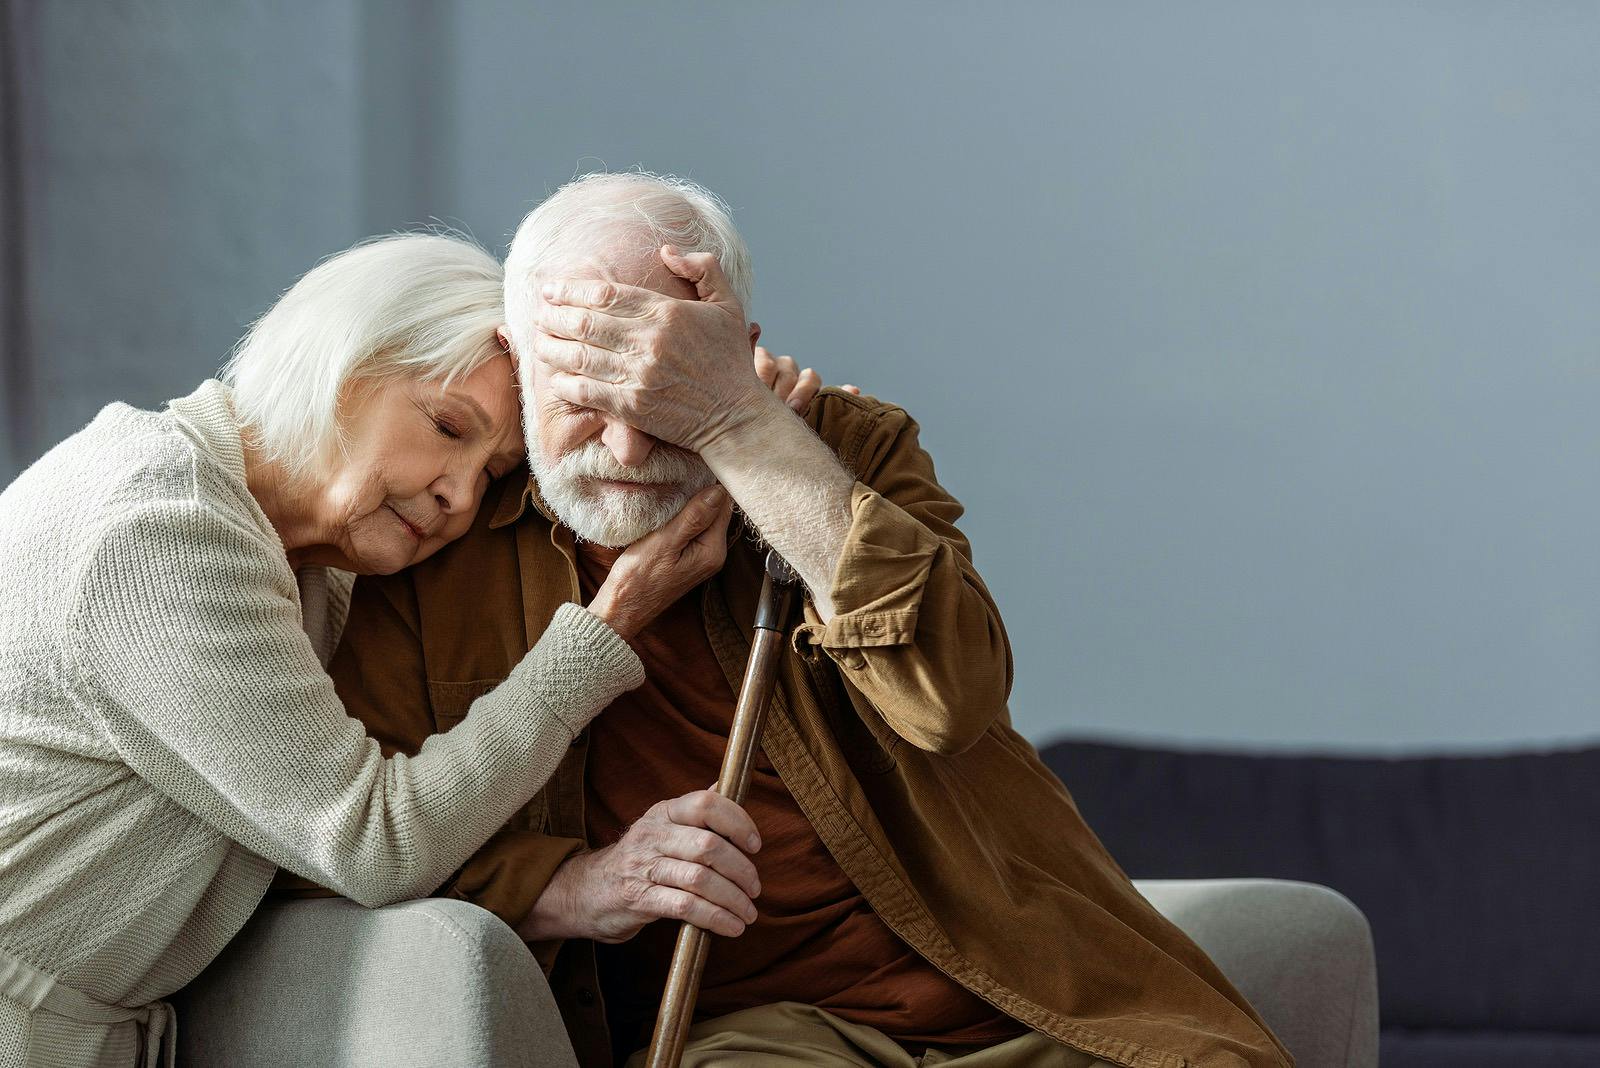 Senior man, sick on dementia, covering eyes with hand while wife embracing him with closed eyes
